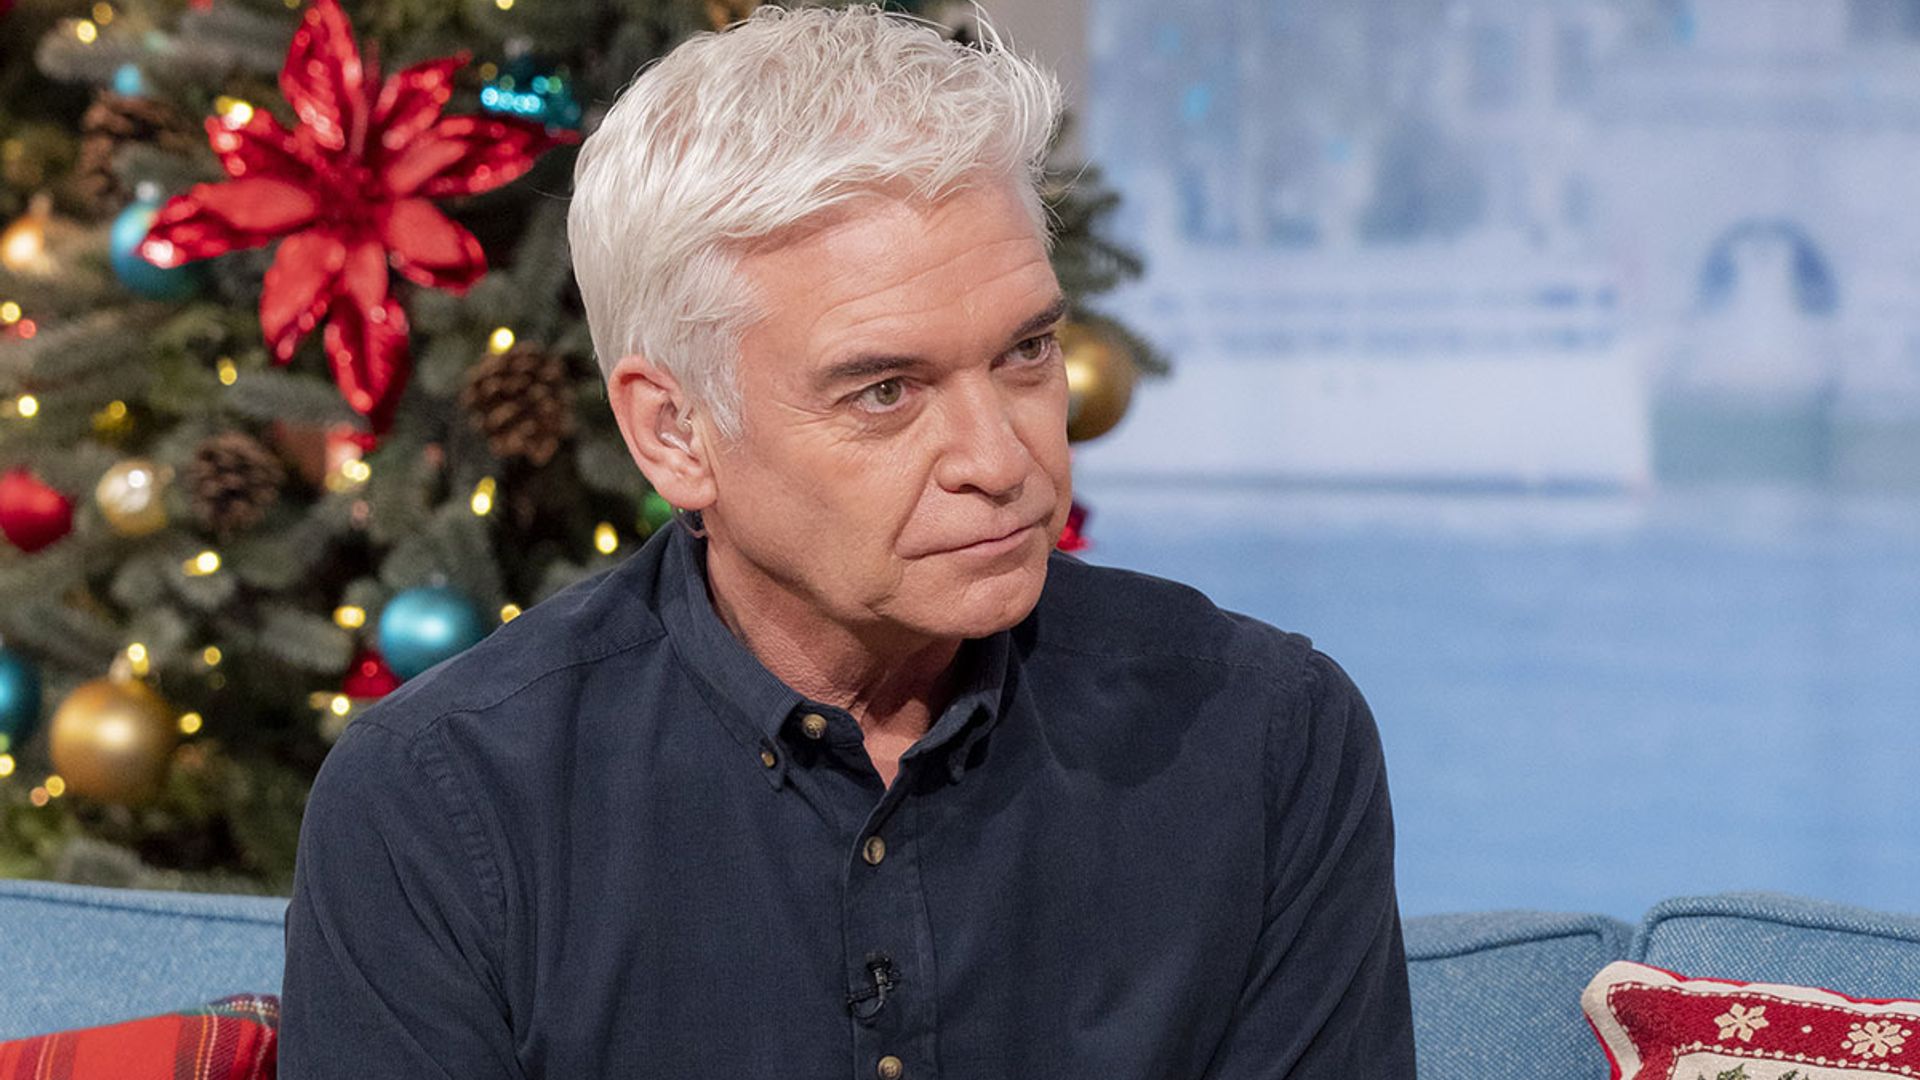 Phillip Schofield opens up about health condition on This Morning